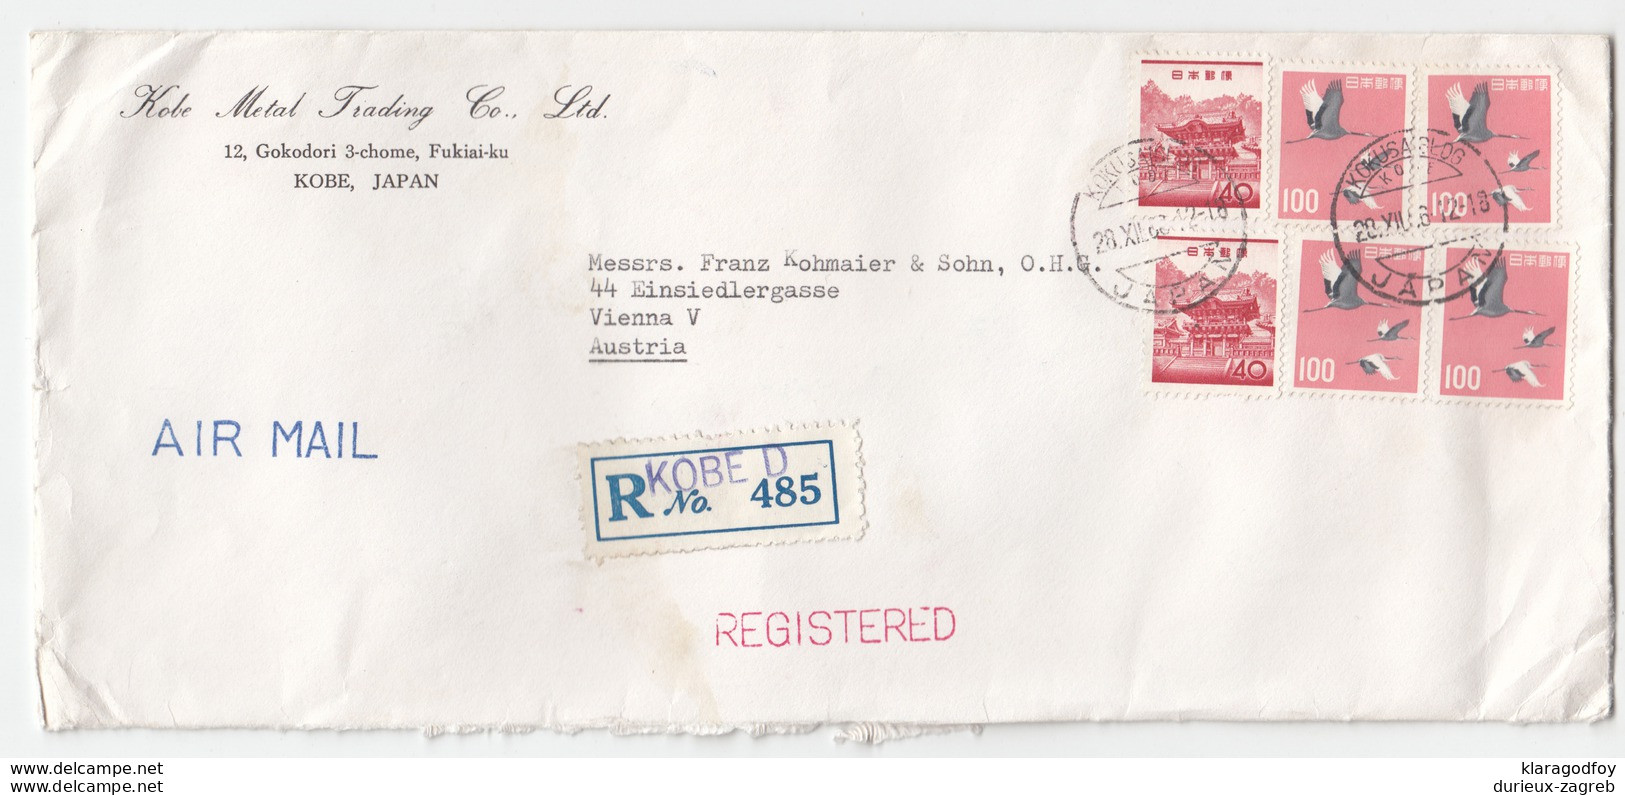 Japan Kobe Metal Trading Company Airmail Cover Letter Registered Travelled 1966 Kobe To Wien Bb161110 - Covers & Documents